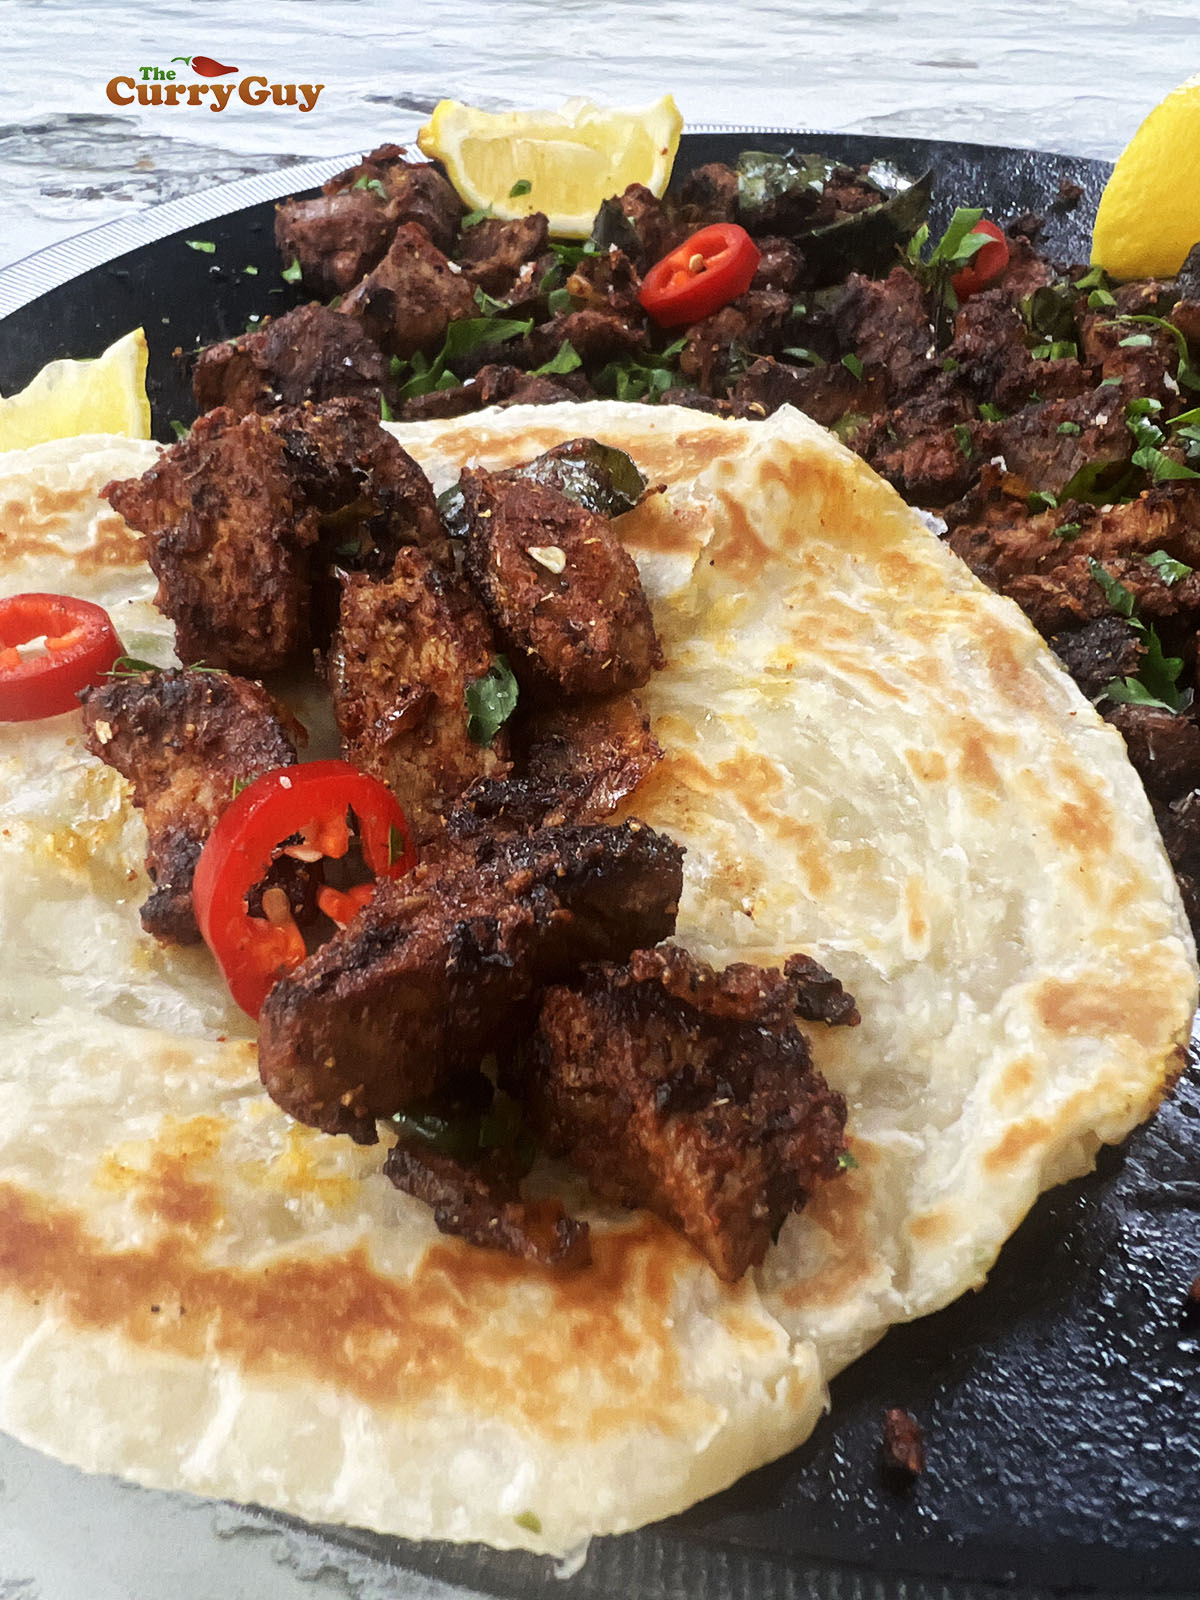 Lamb stir fry wrapped in a paratha